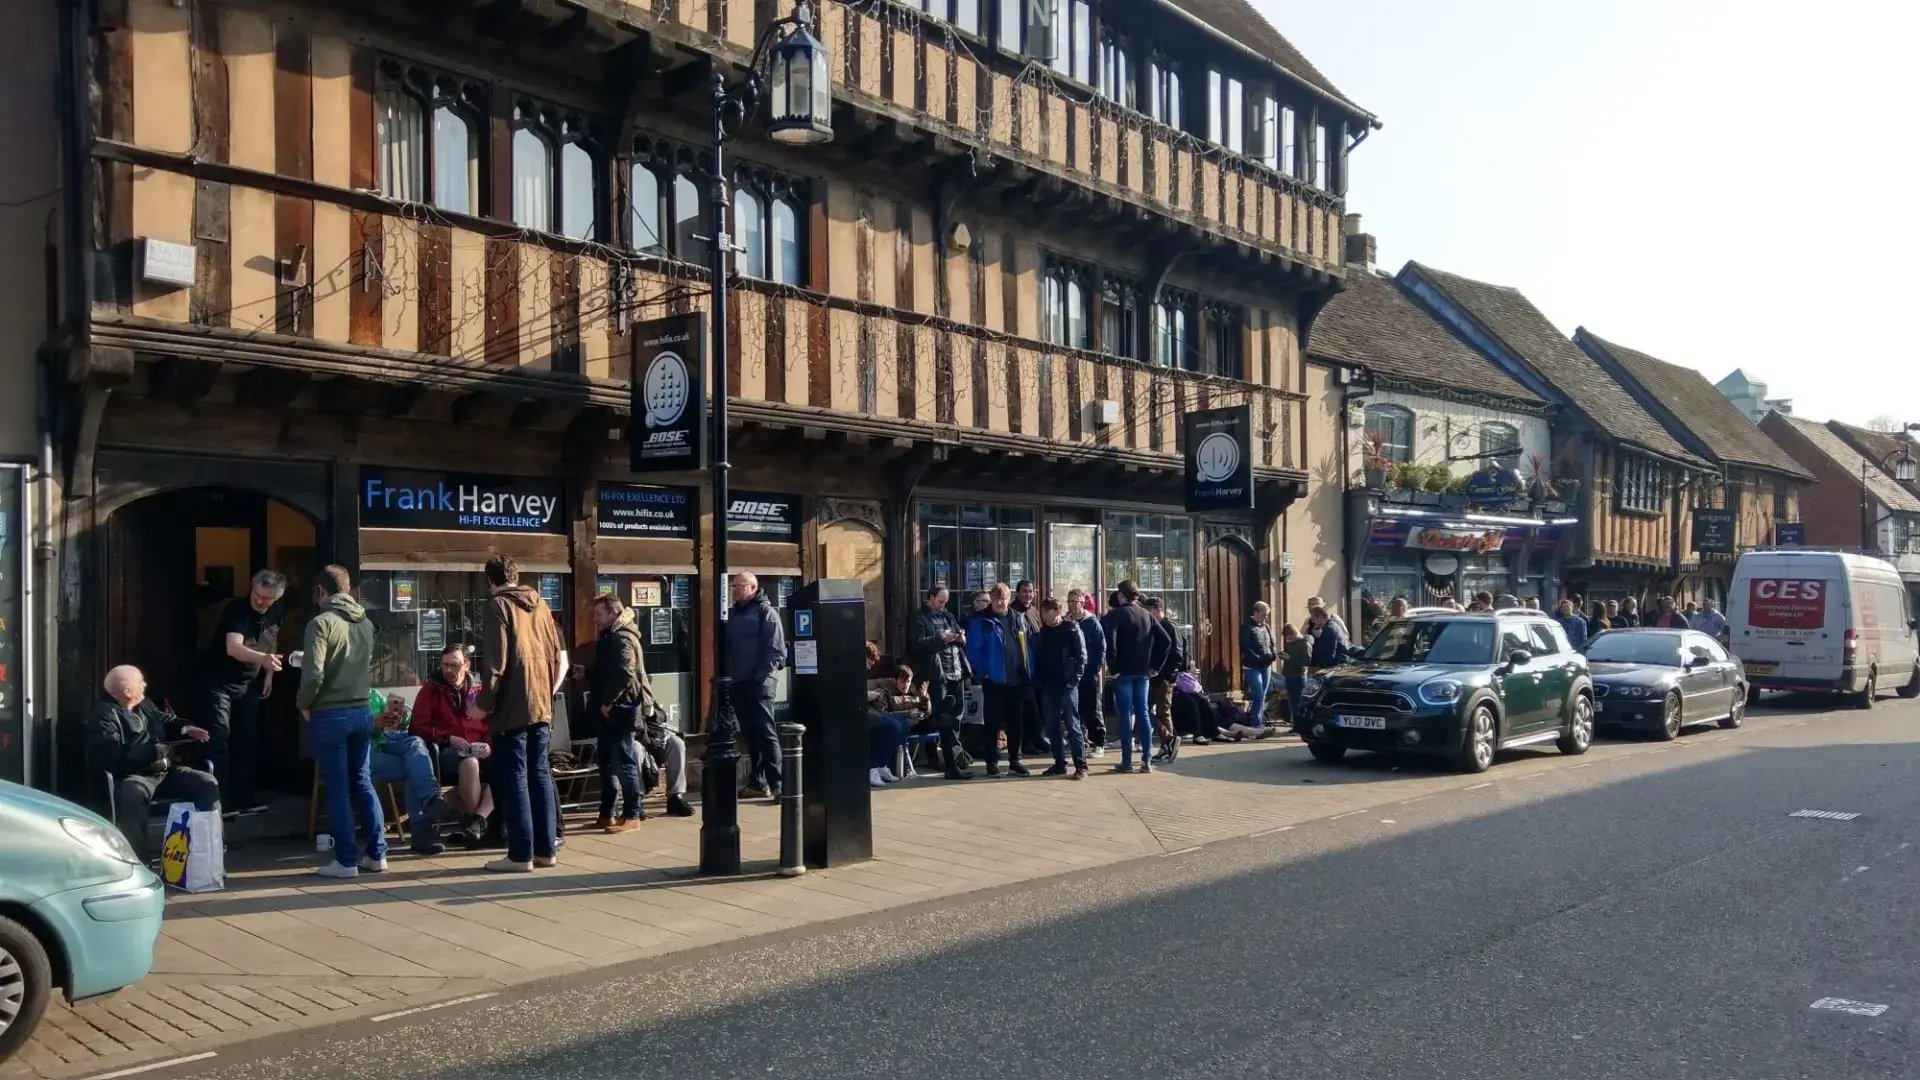 HiFix is a client of LoudLocal, this image shows the store front of HiFix in Coventry with a queue of people outside.